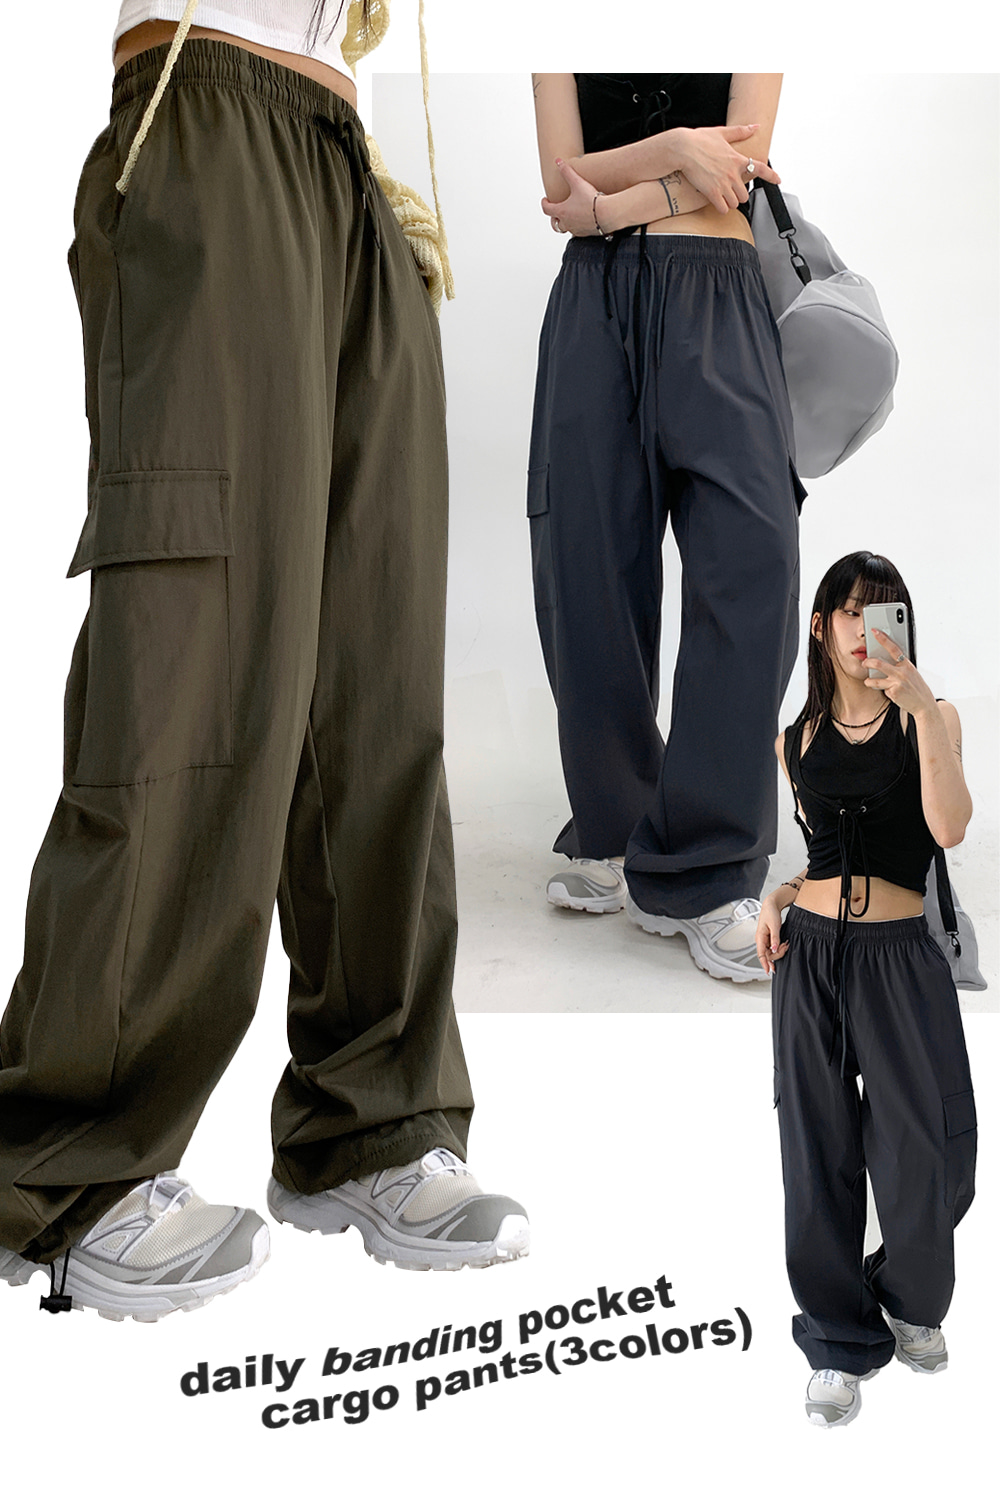 daily banding pocket cargo pants (3colors)